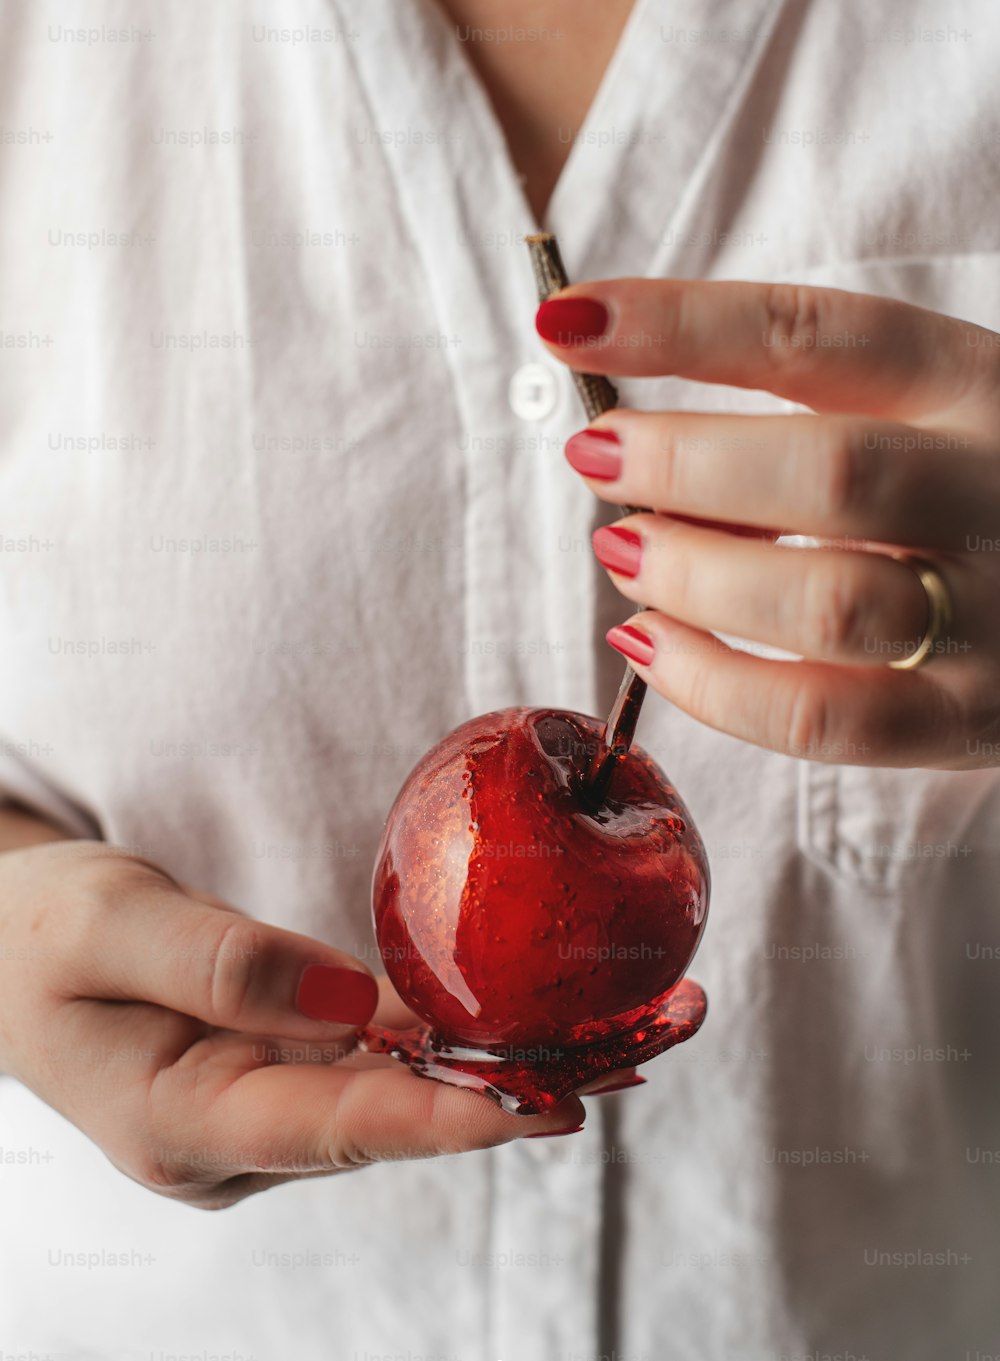 a woman holding an apple with a bite taken out of it